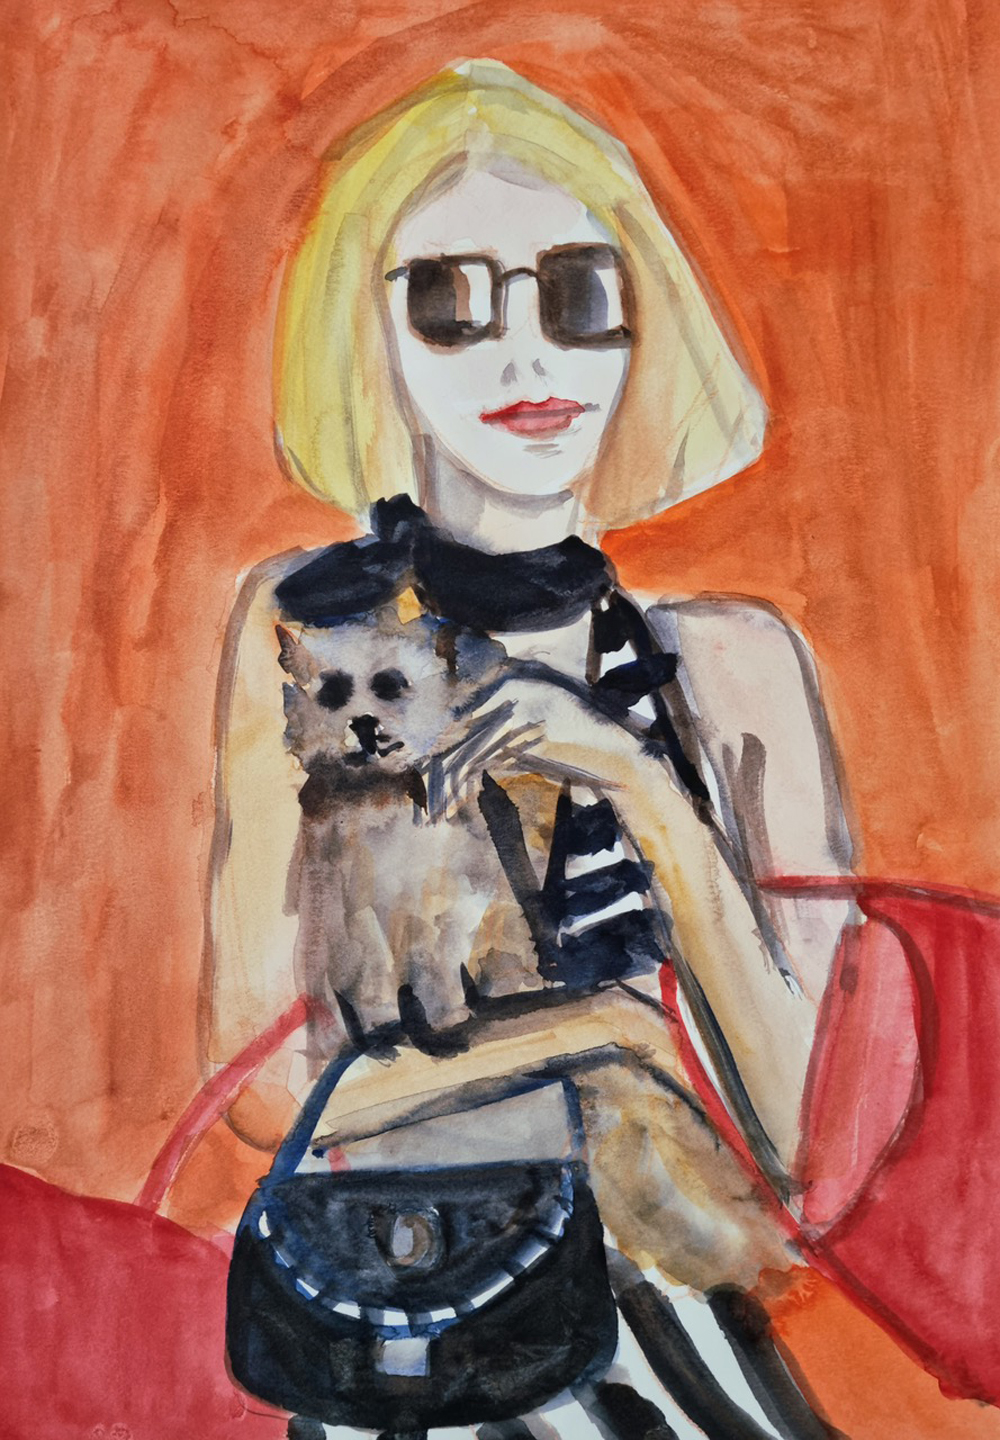 Ms Sunglasses and her Shopping Bags and Dog